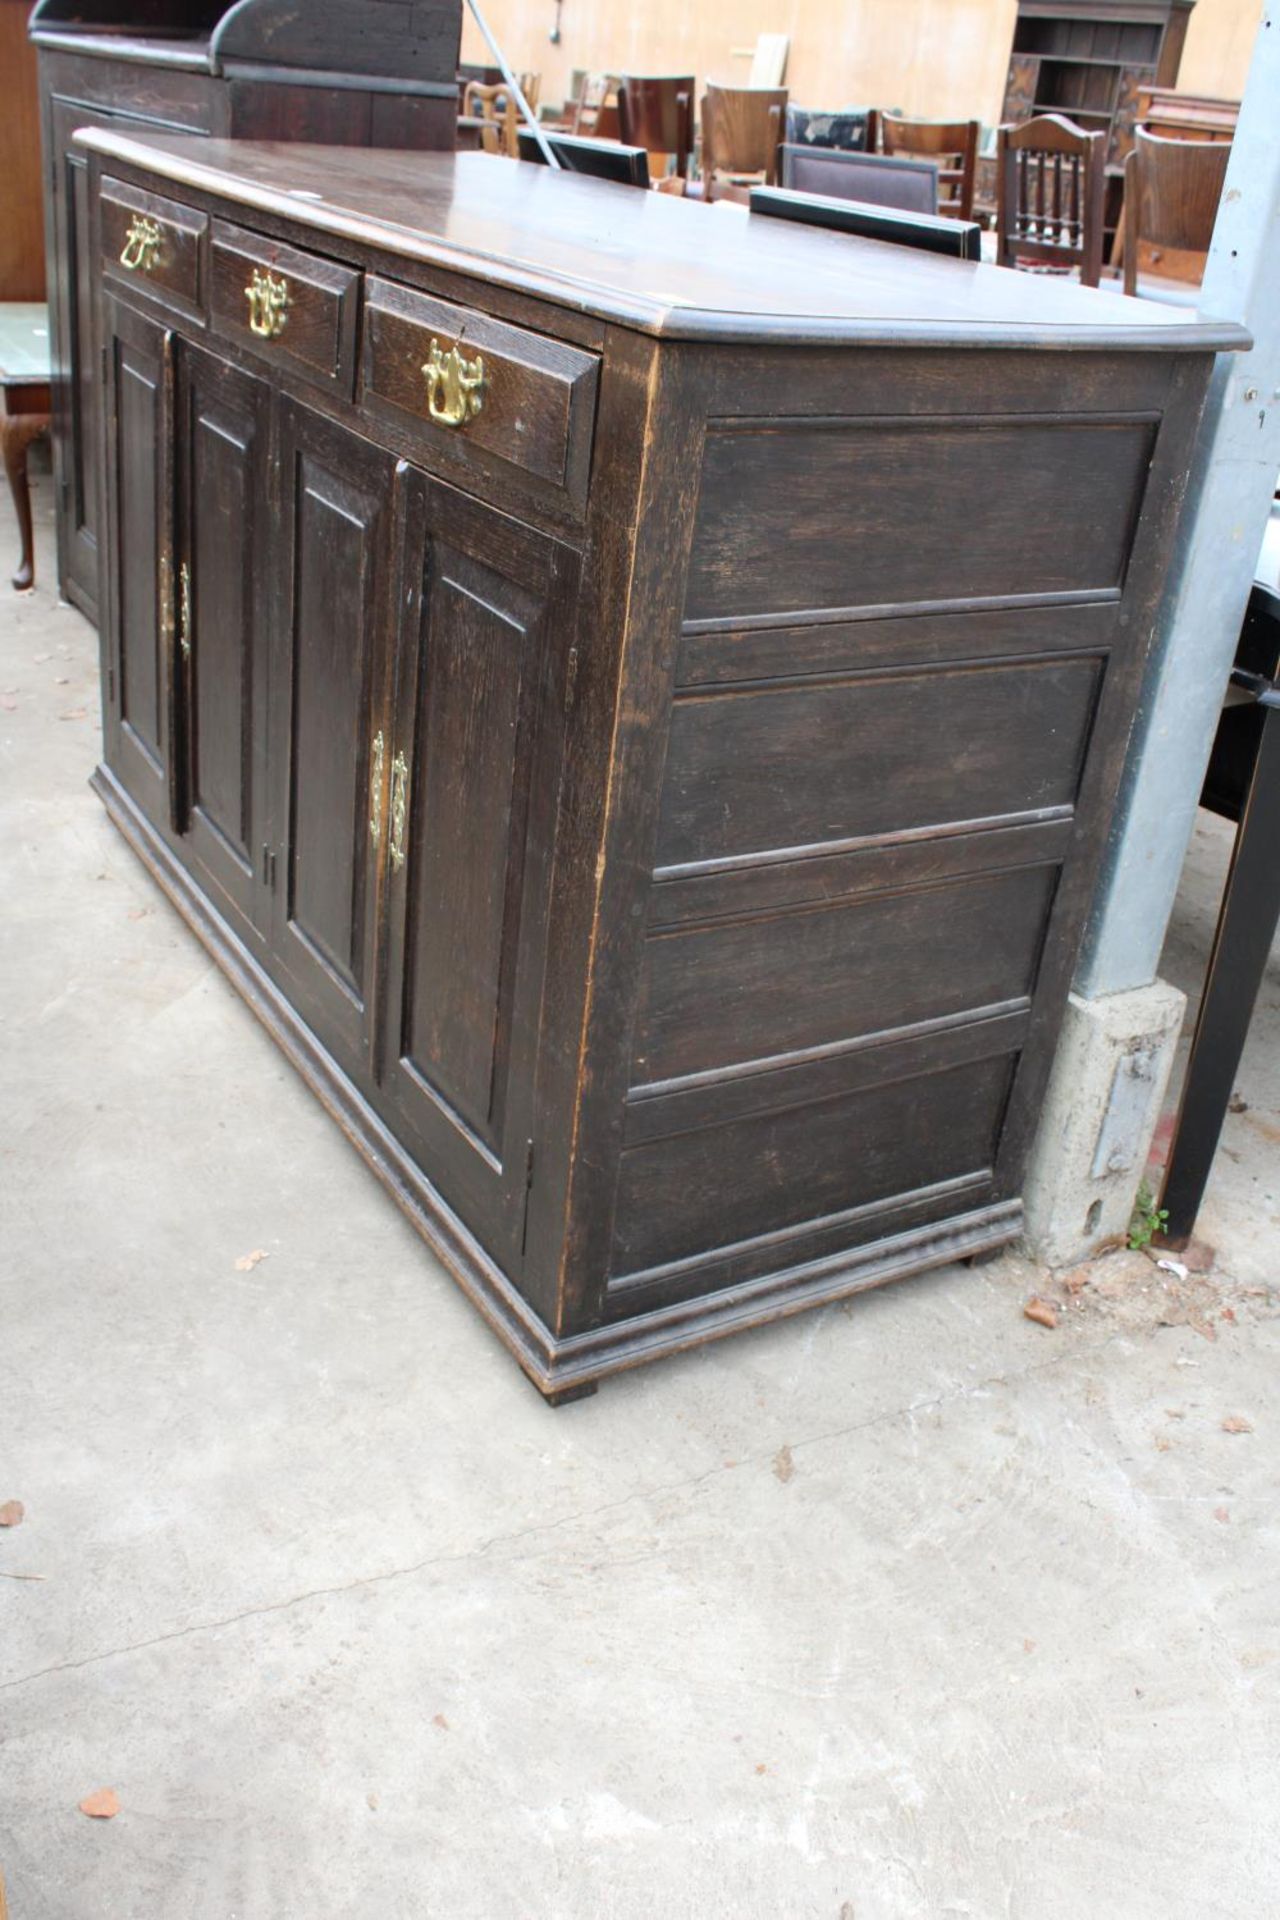 AN OAK GEORGE III STYLE DRESSER WITH FOUR CUPBOARDS AND THREE DRAWERS AND BRASS HANDLES, 60" WIDE - Image 2 of 4